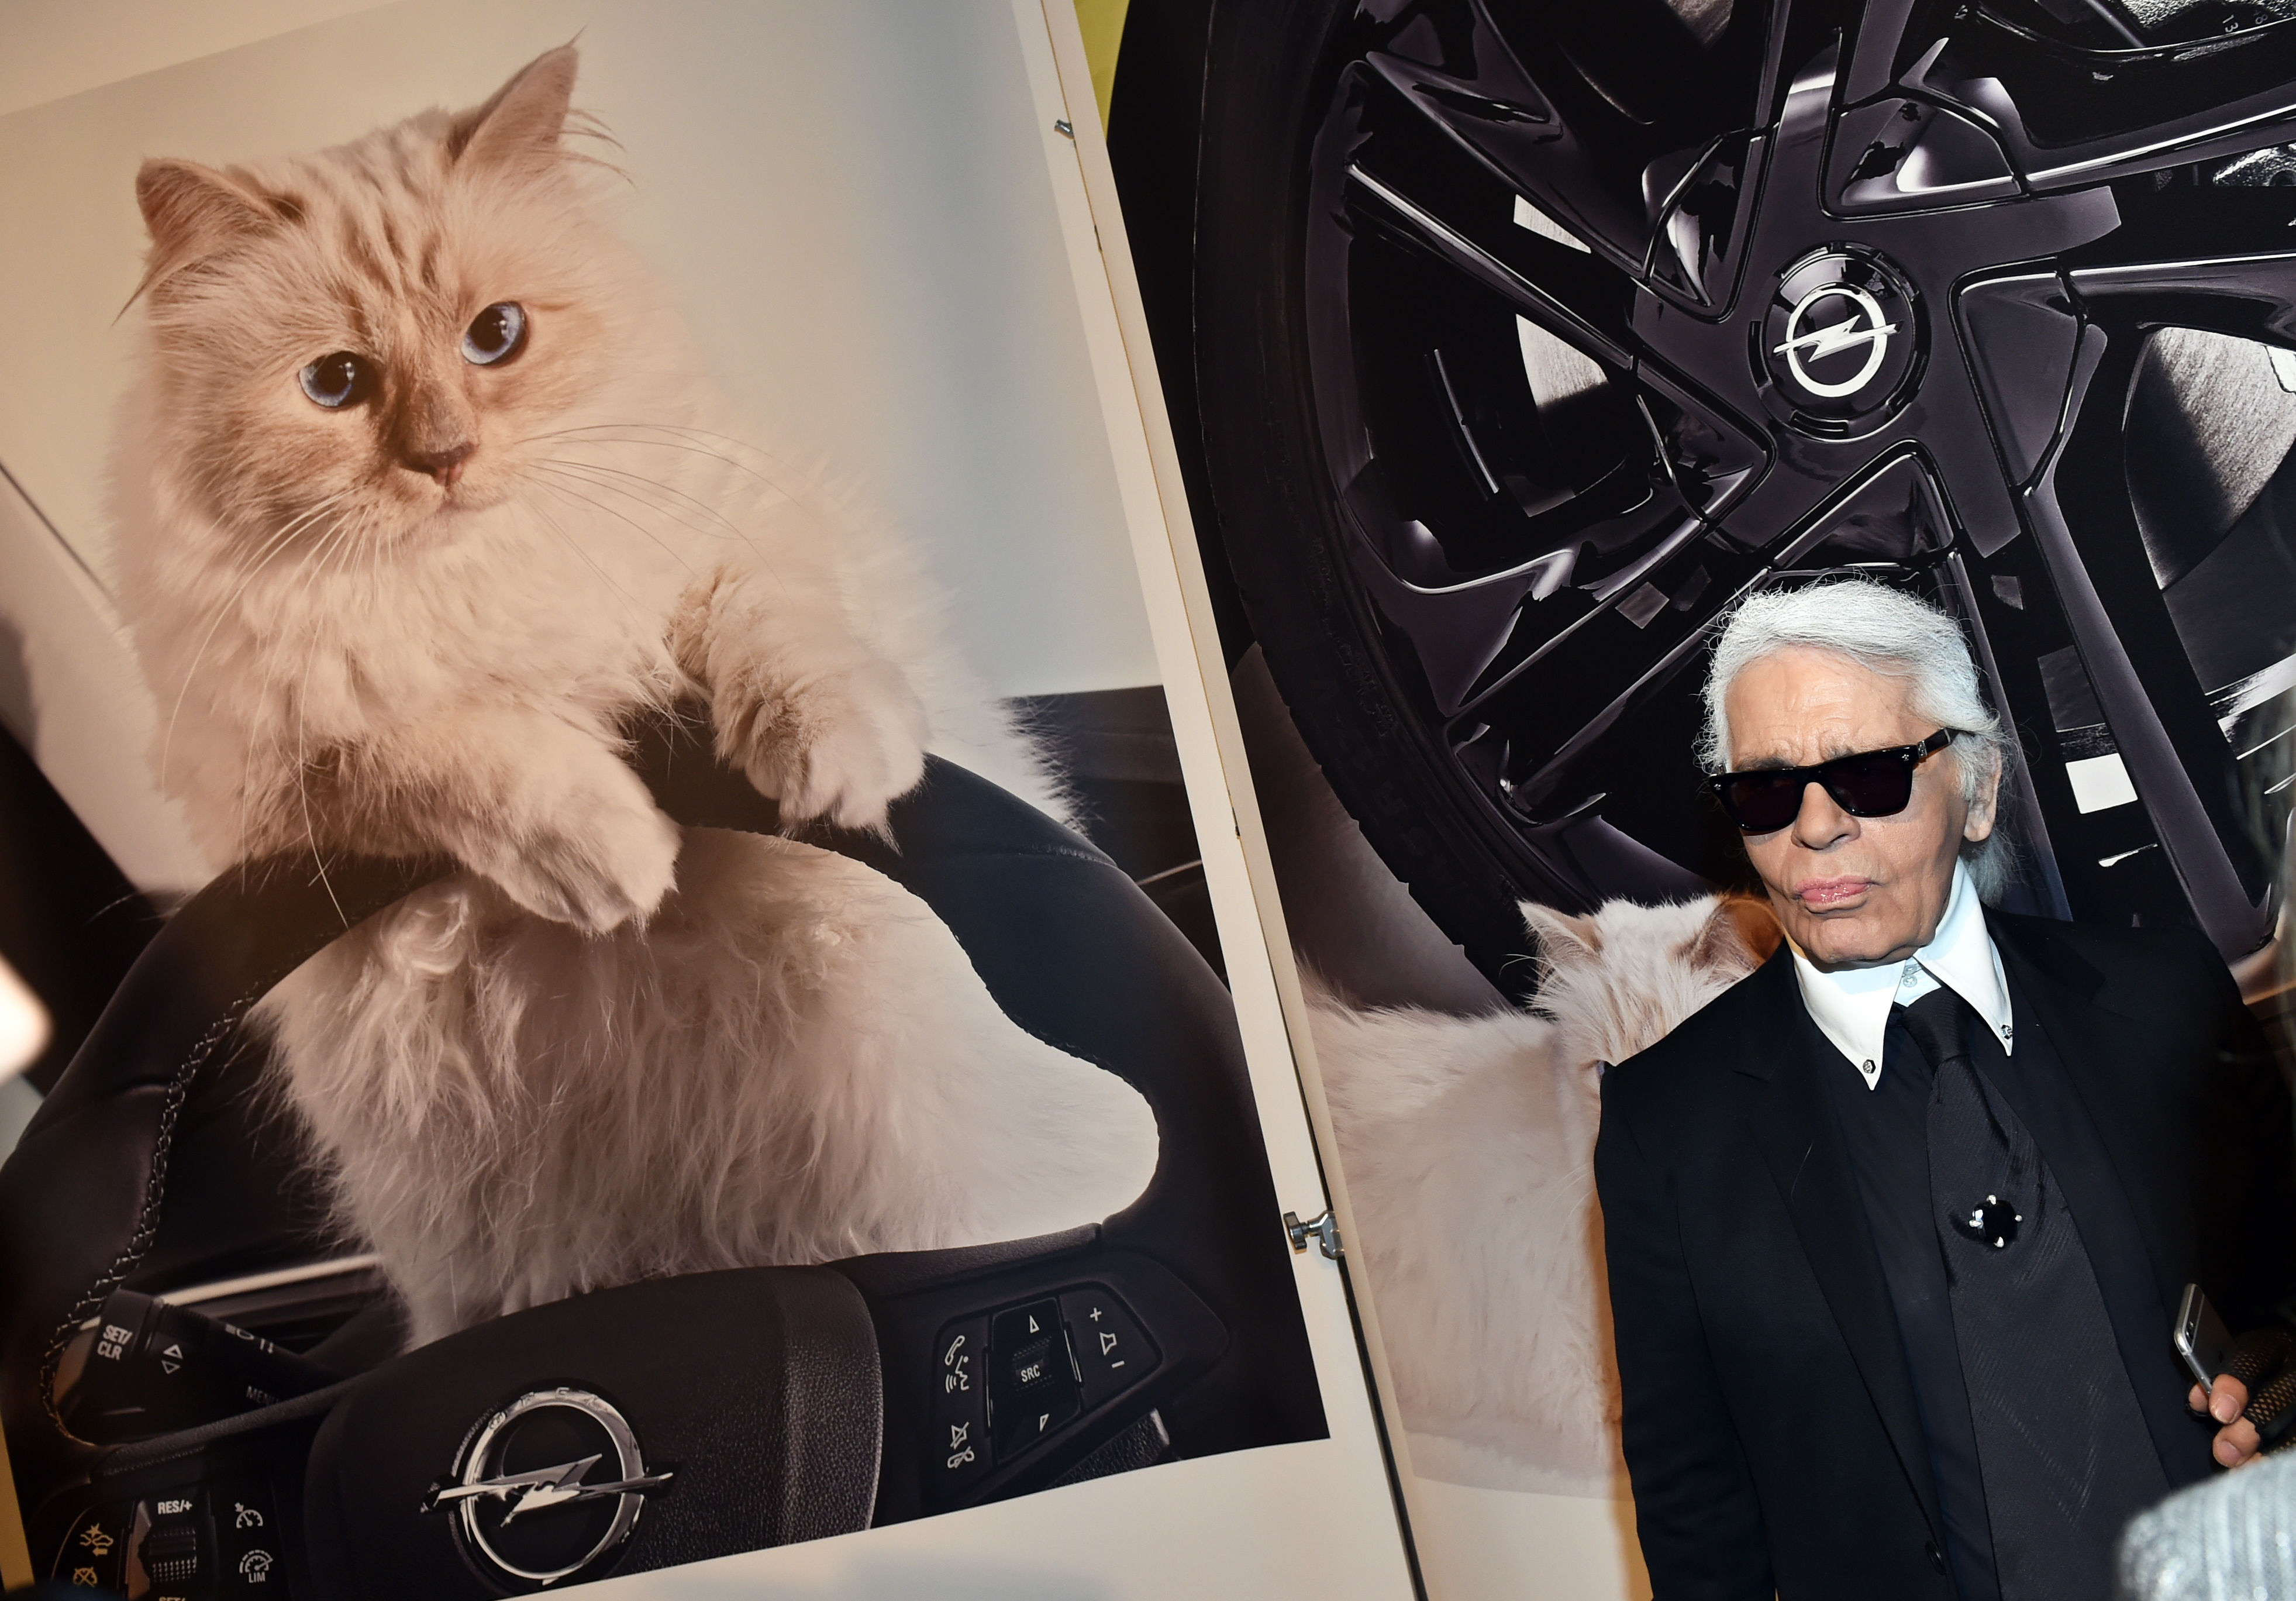 Karl Lagerfeld's cat set to inherit a chunk of the fashion designer's  fortune to maintain lavish lifestyle - ABC News